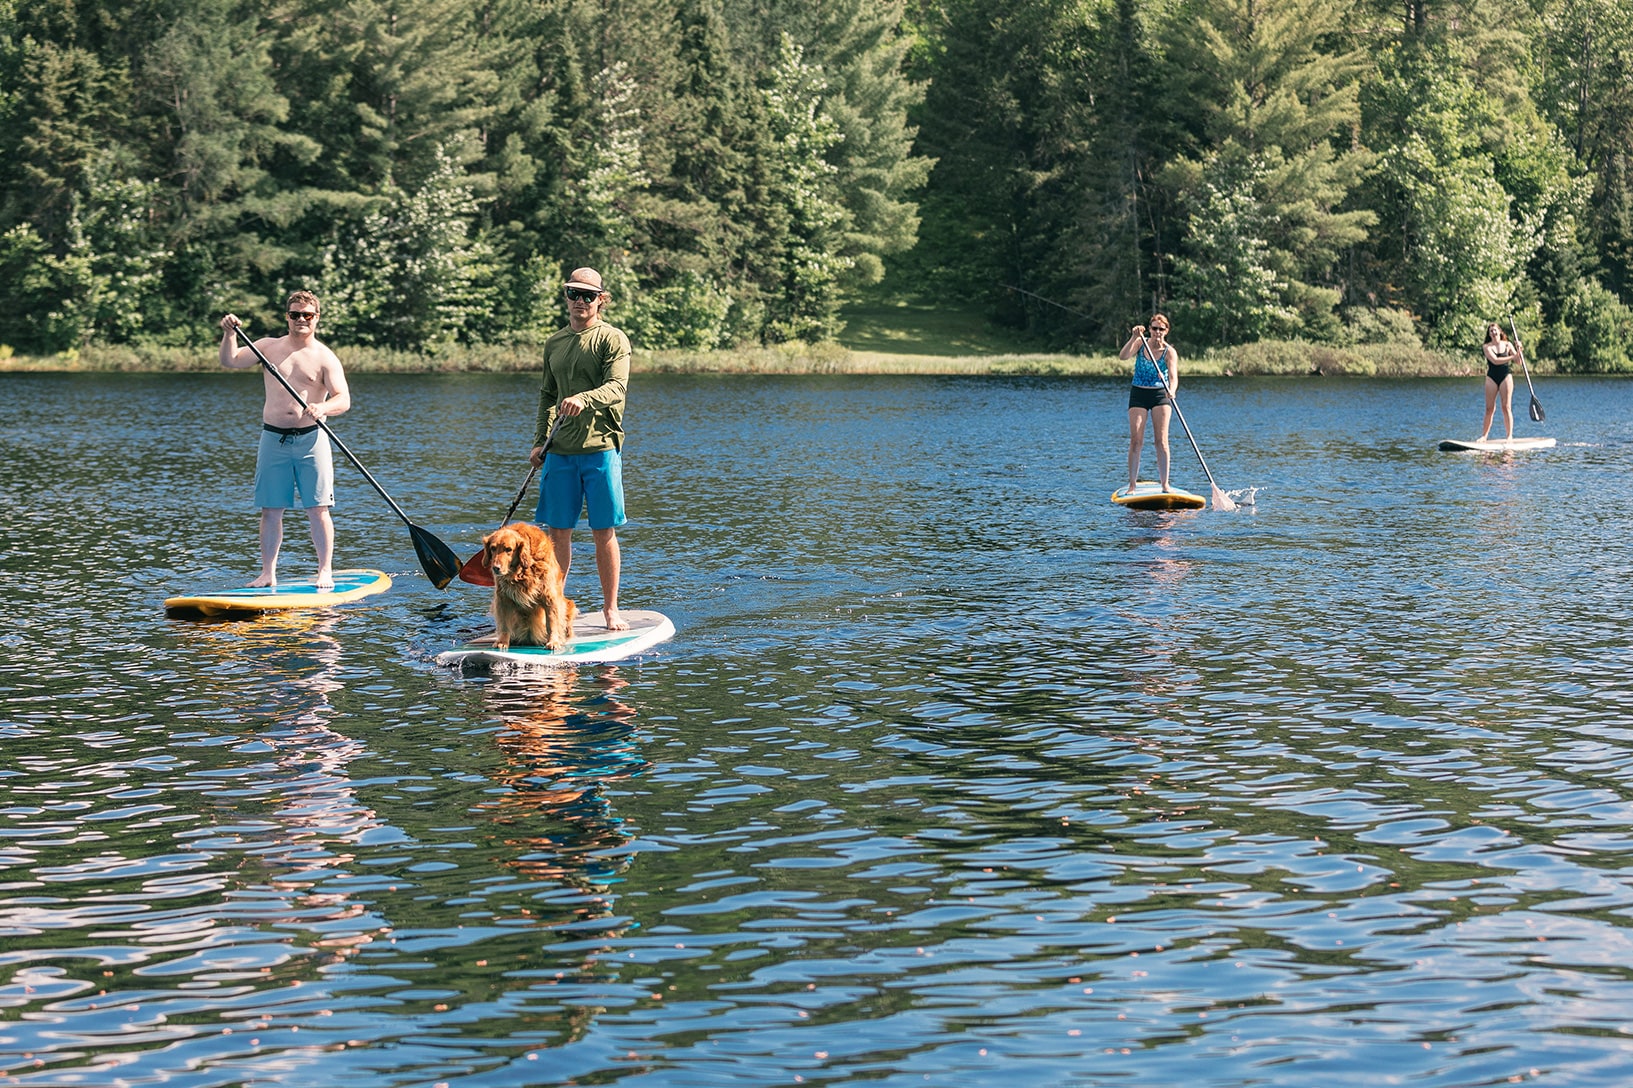 Four people paddleboarding on a lake, with one person having a dog on their board. They are surrounded by trees on the shoreline in the background.